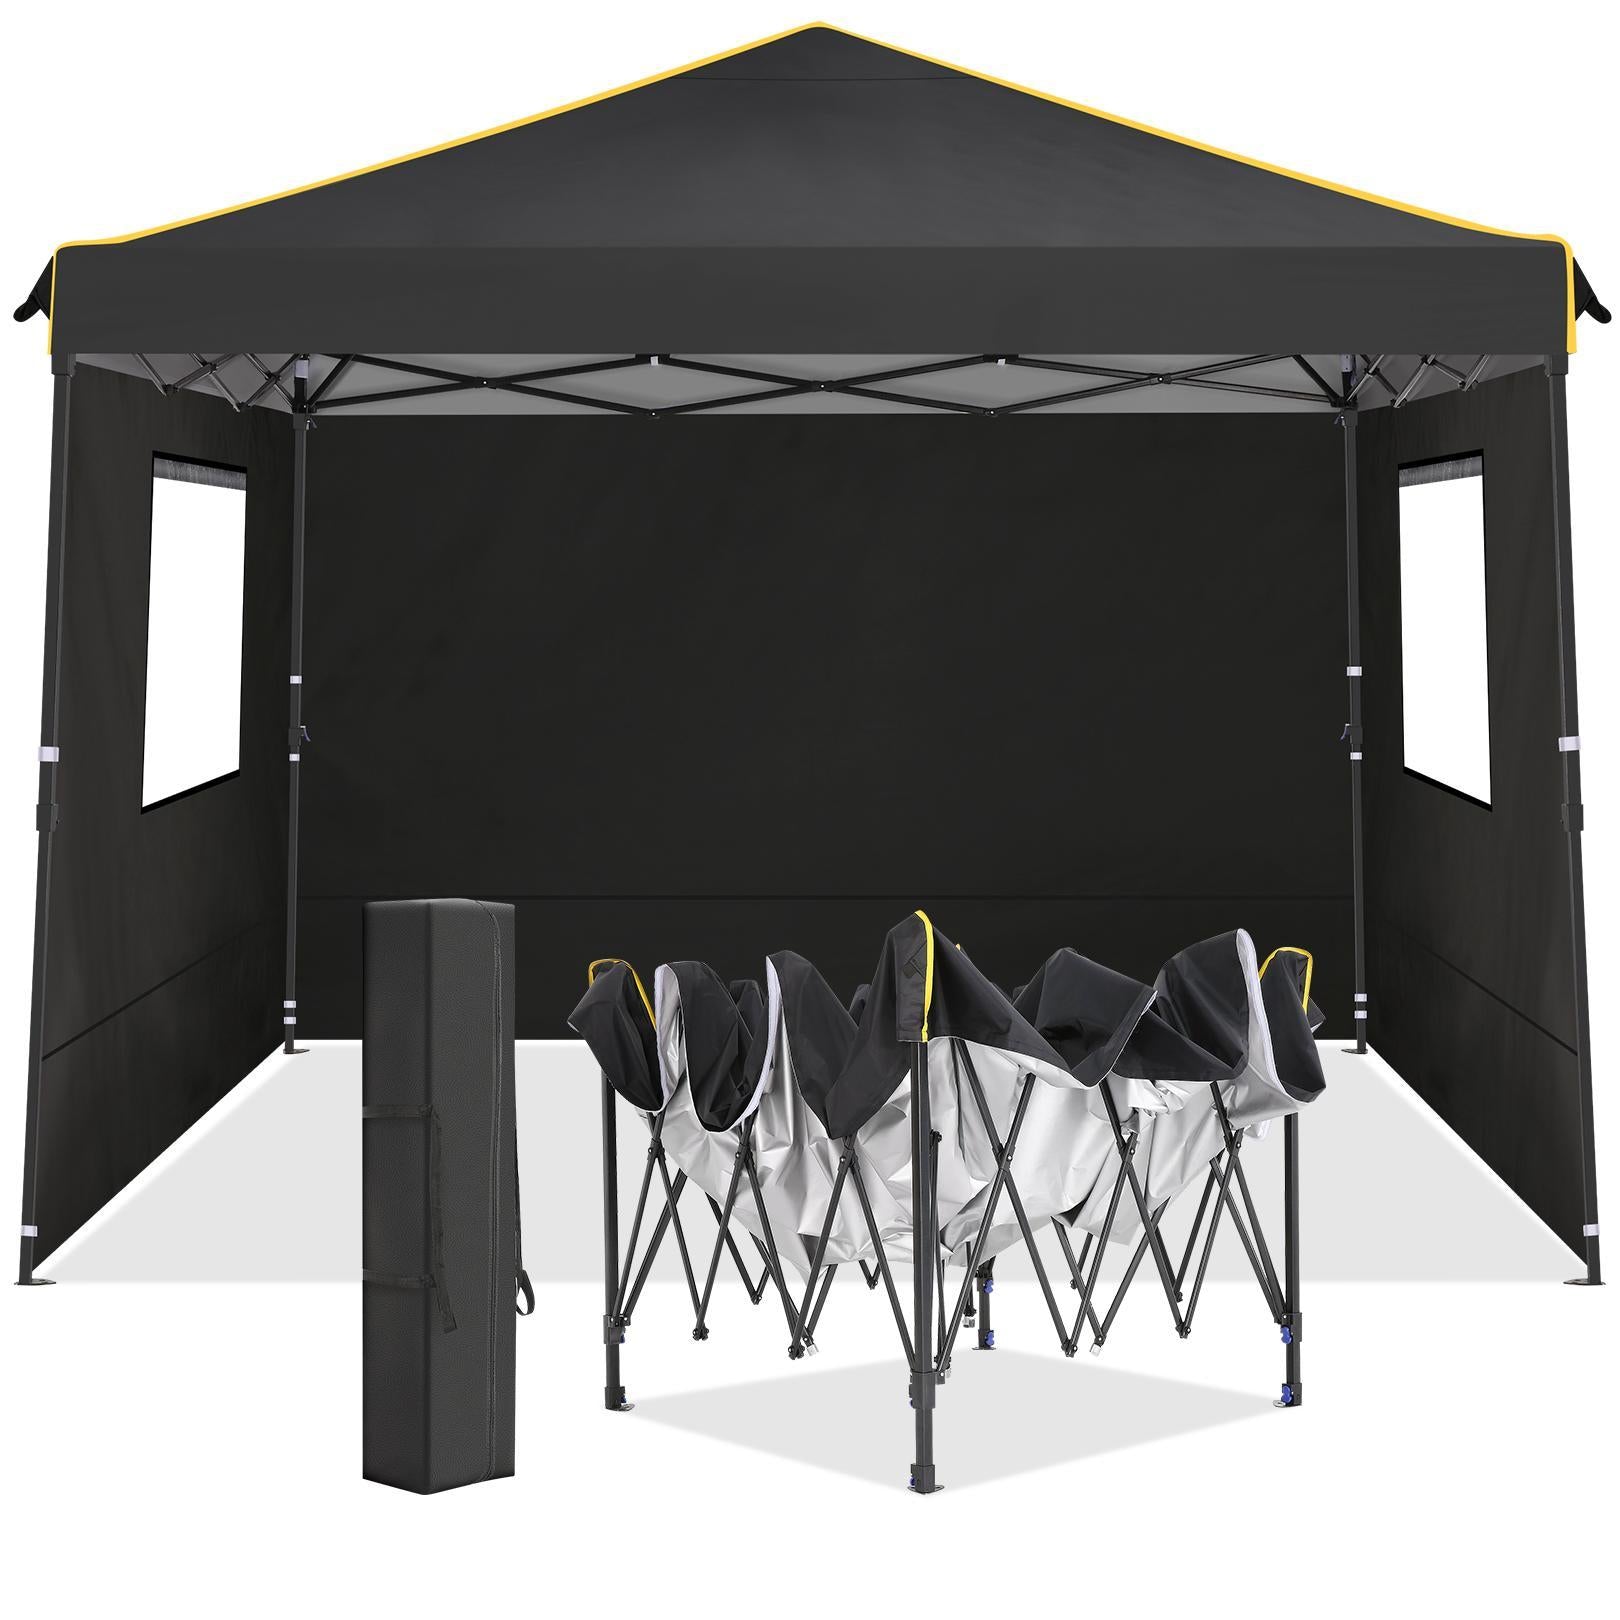 Sihanm 10'x10' Outdoor Canopy Tent Gazebo - Pop Up Instant Canopy with Waterproof and UV Protection - Patio Gazebo for Backyard, Outdoor, Patio and Lawn Clearance Sale Black